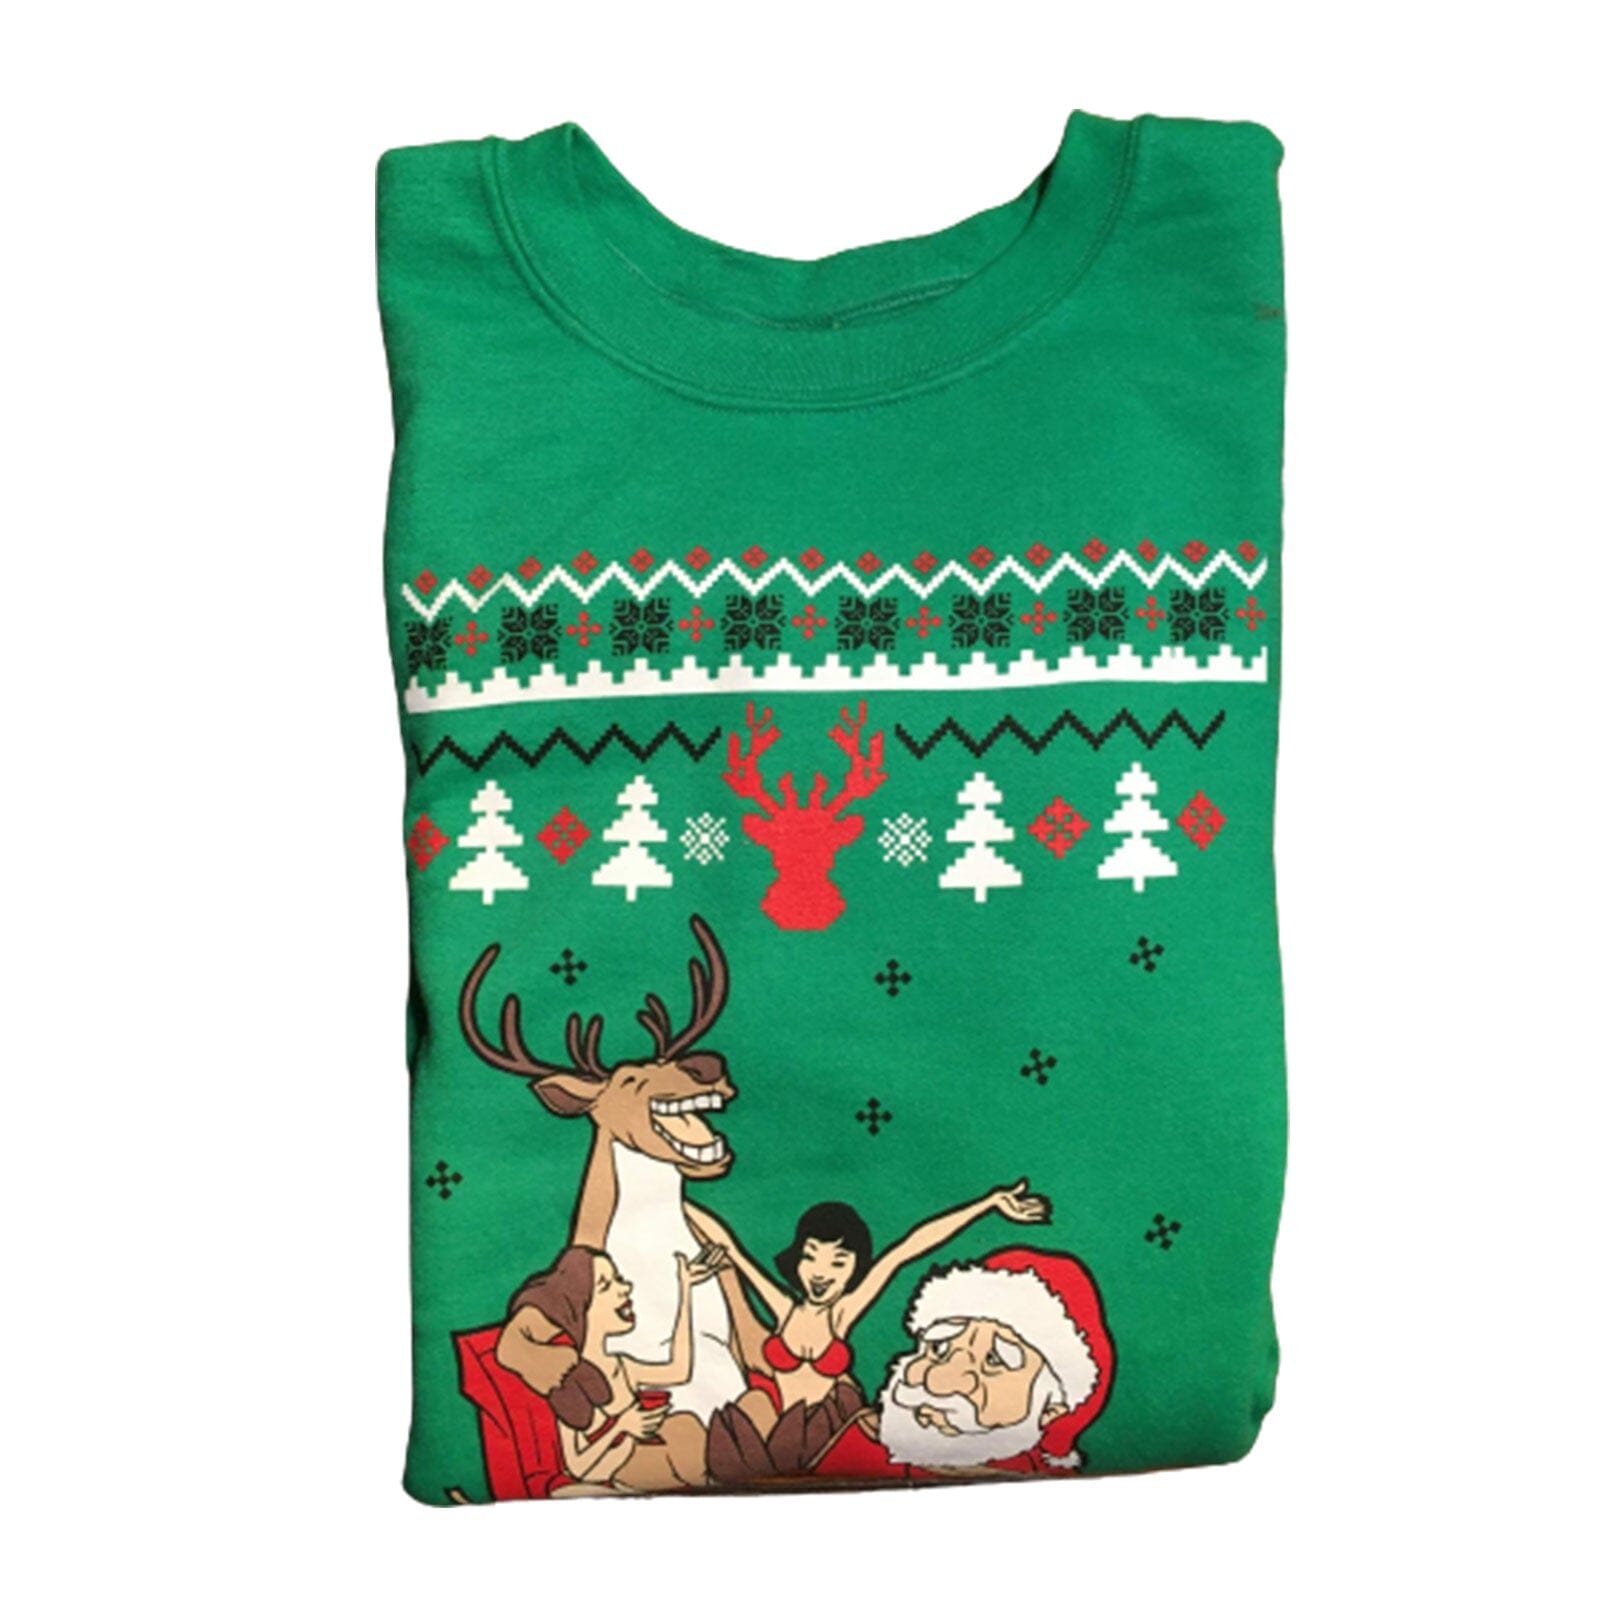 PARTY REINDEER - Green "Ugly" Christmas Sweaters Snowtorious 